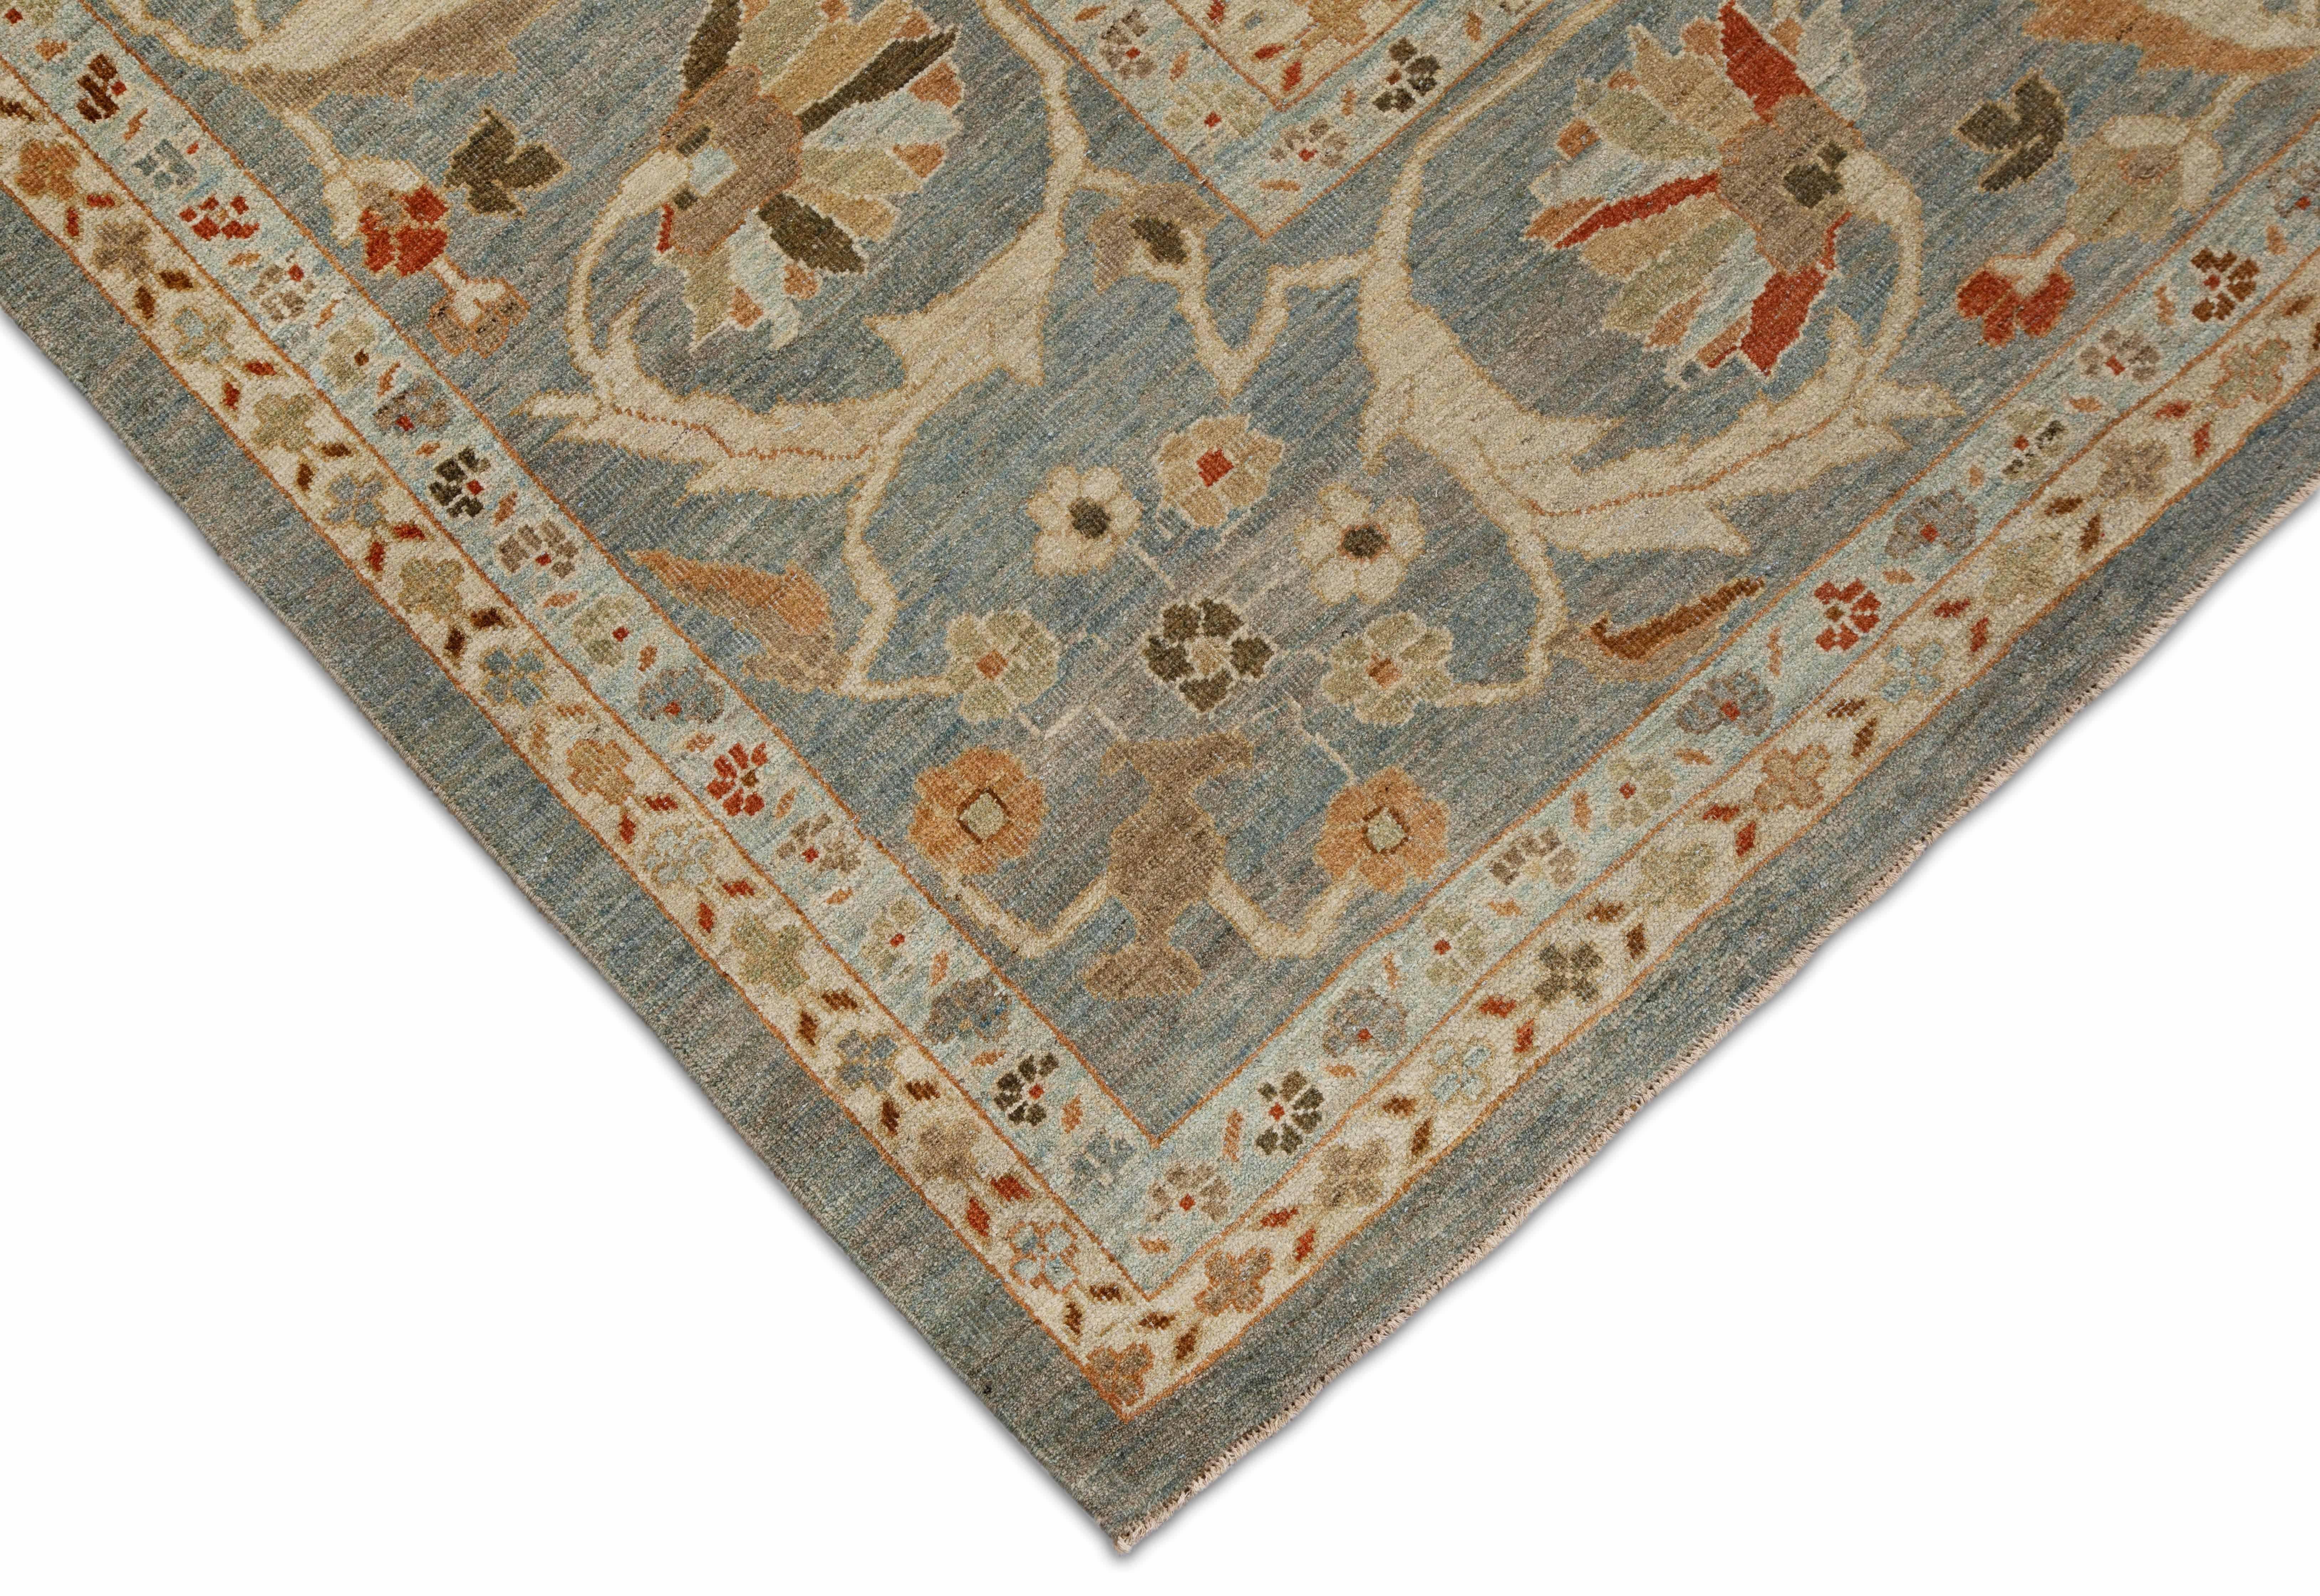 Contemporary Turkish Sultanabad Rug with Blue Gray Field of Colored Flower Detai For Sale 3